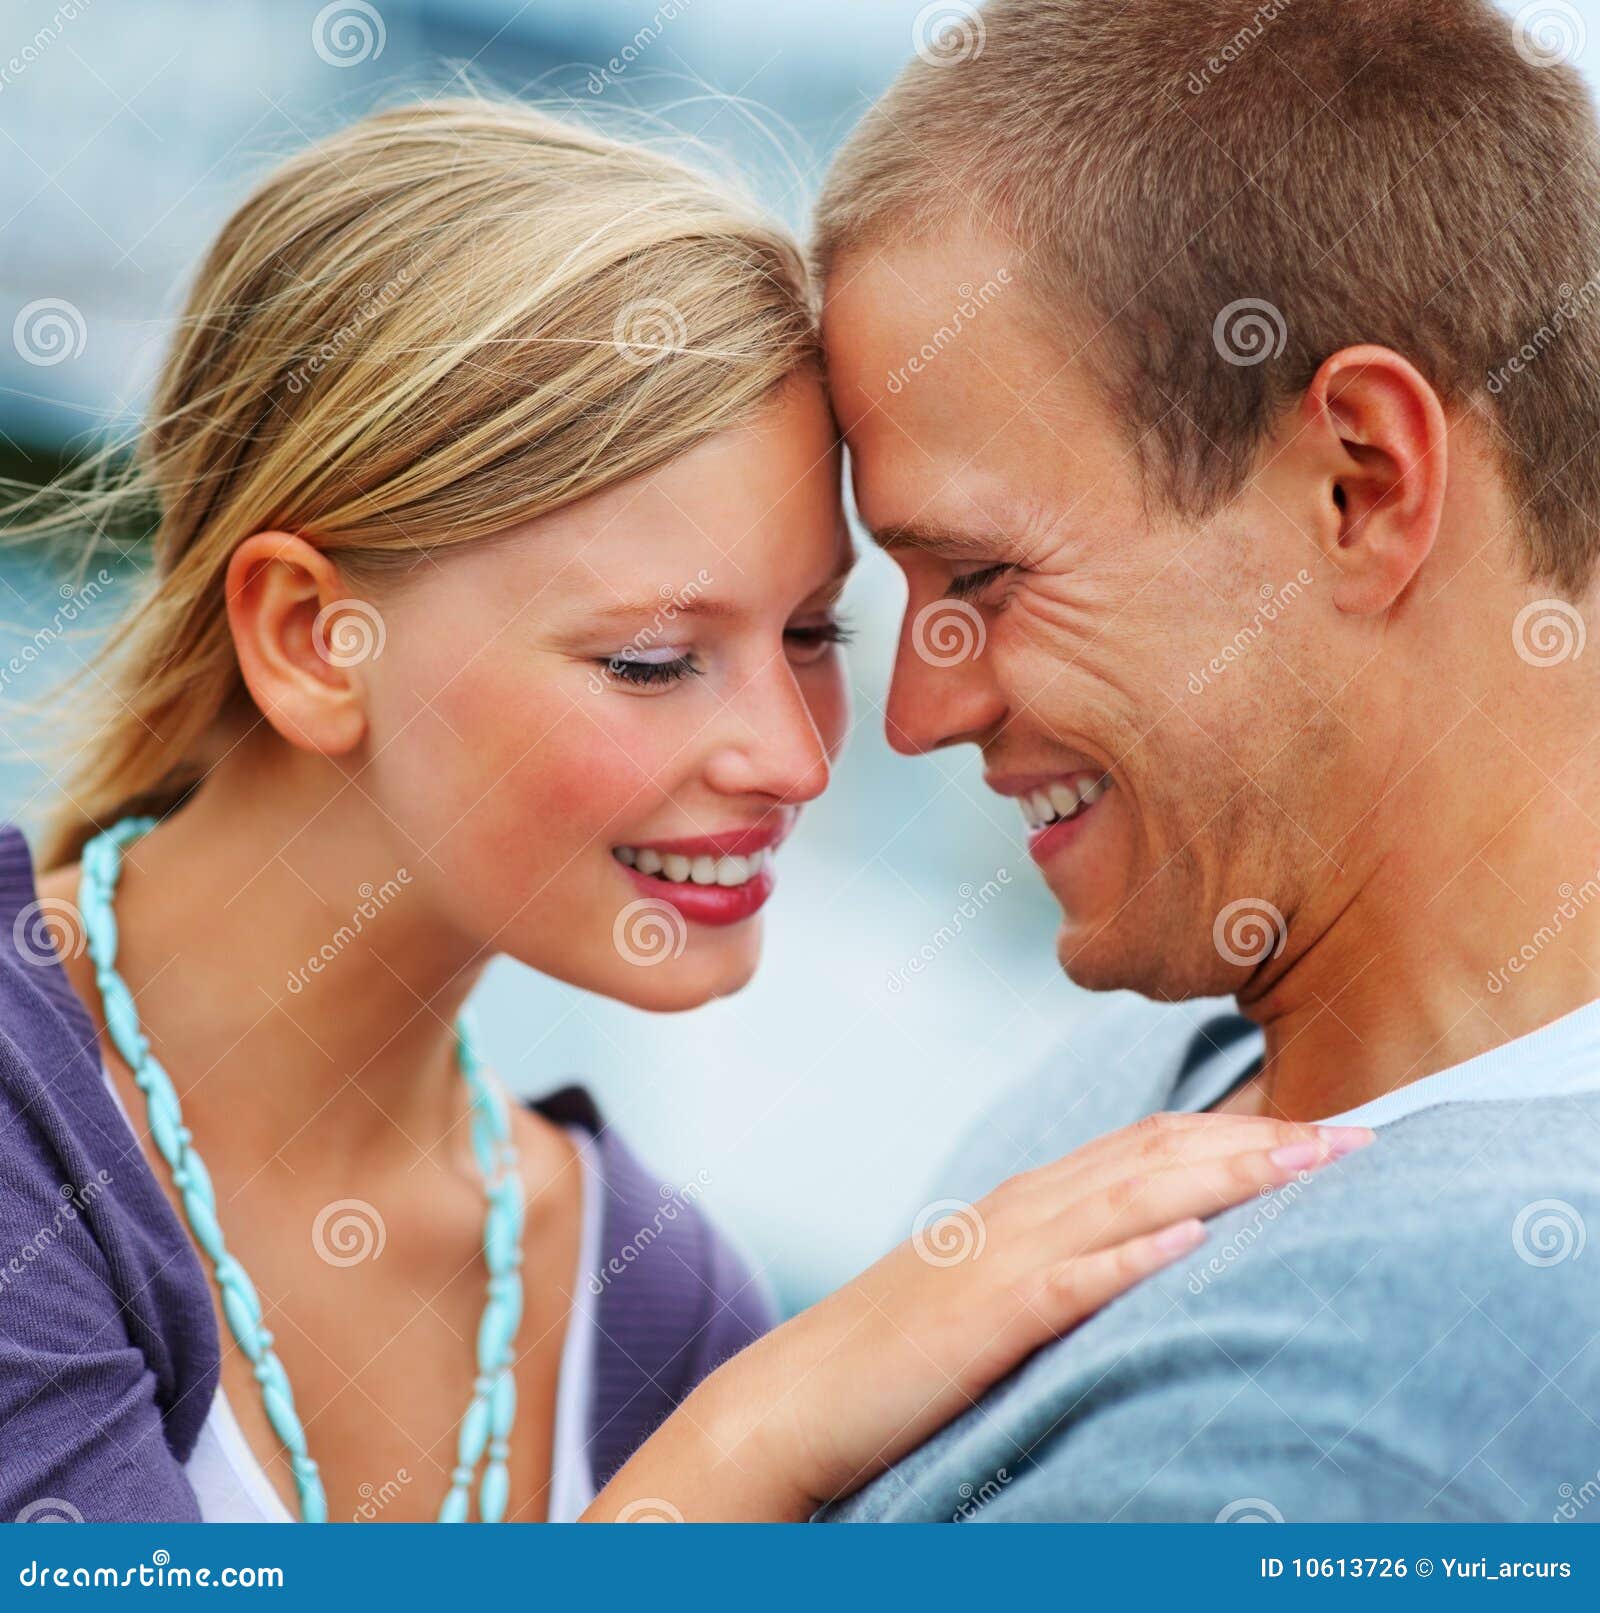 Closeup of a Romantic Young Couple Smiling Stock Photo - Image of ...